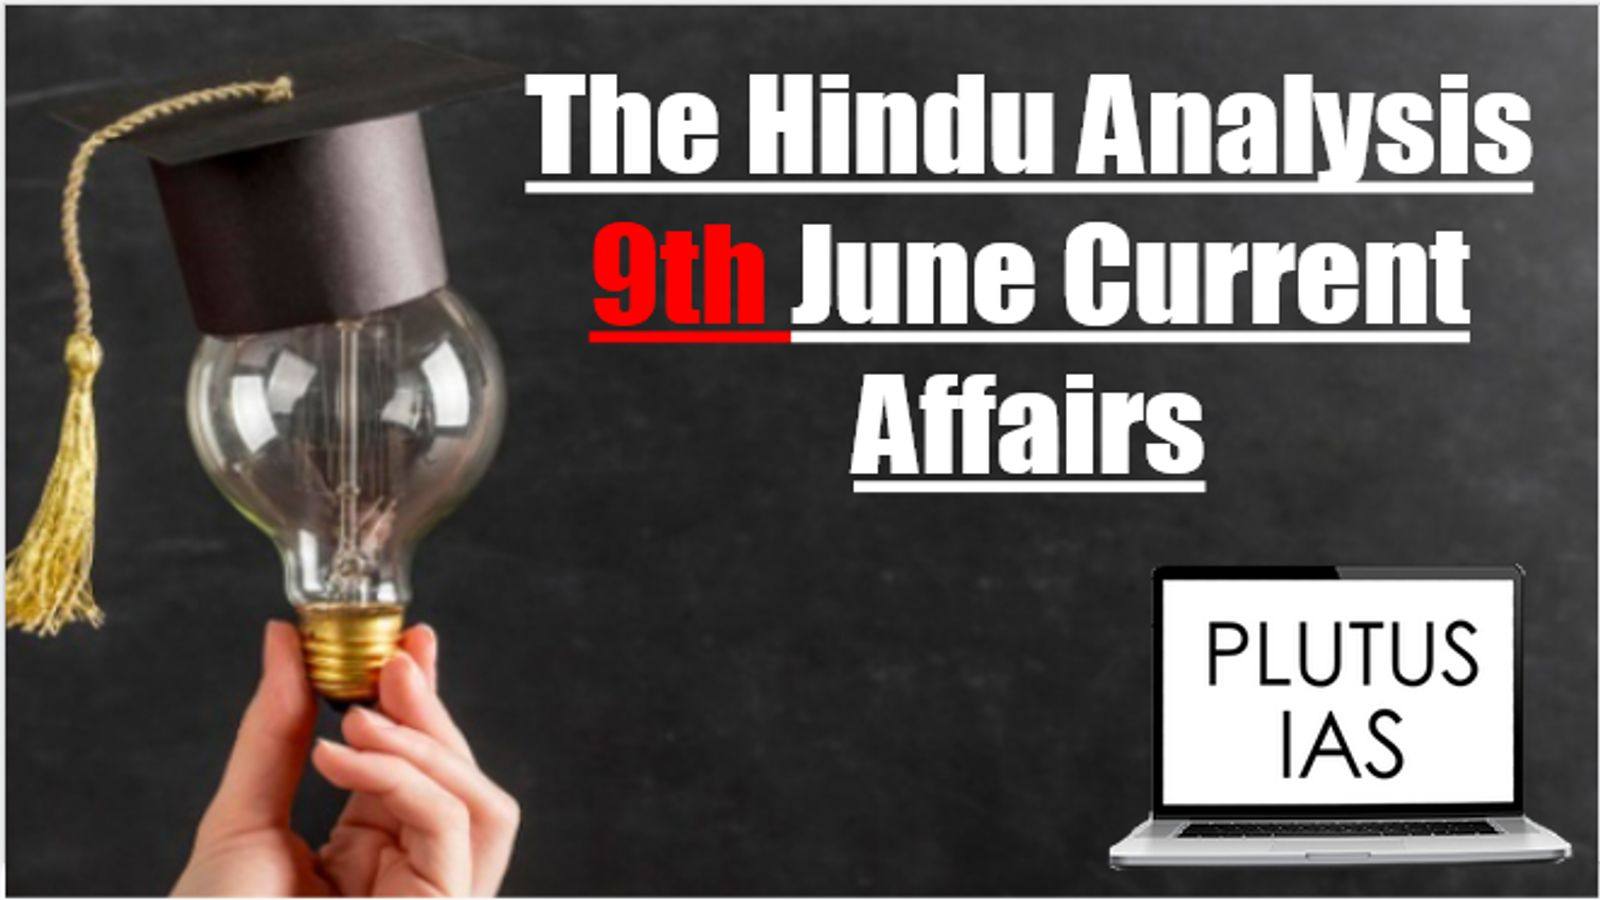 Today Current Affairs 9th June